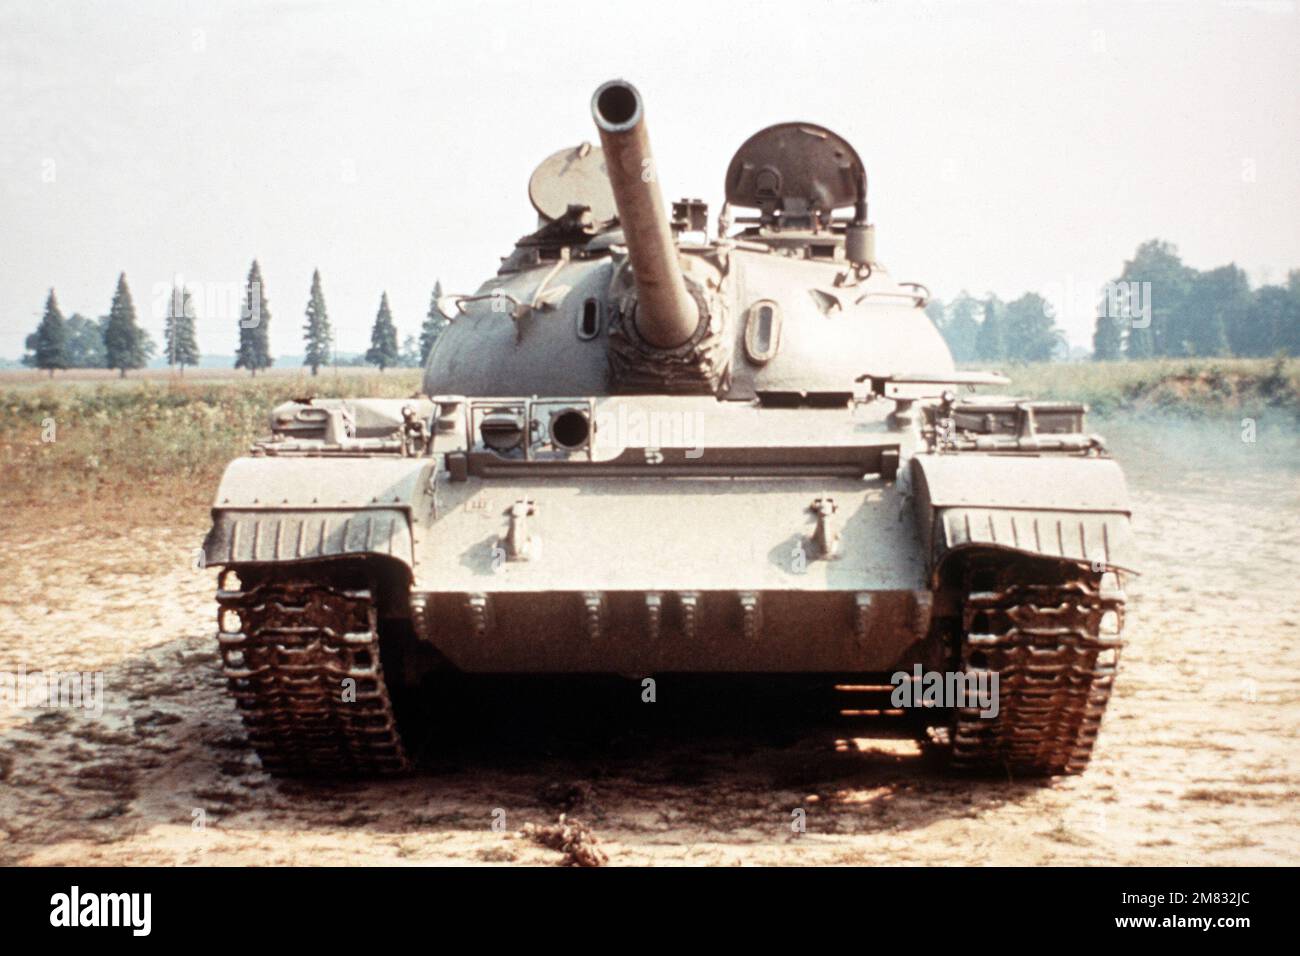 Front view of a Soviet-built T-54 main battle tank. Country: Unknown Stock Photo